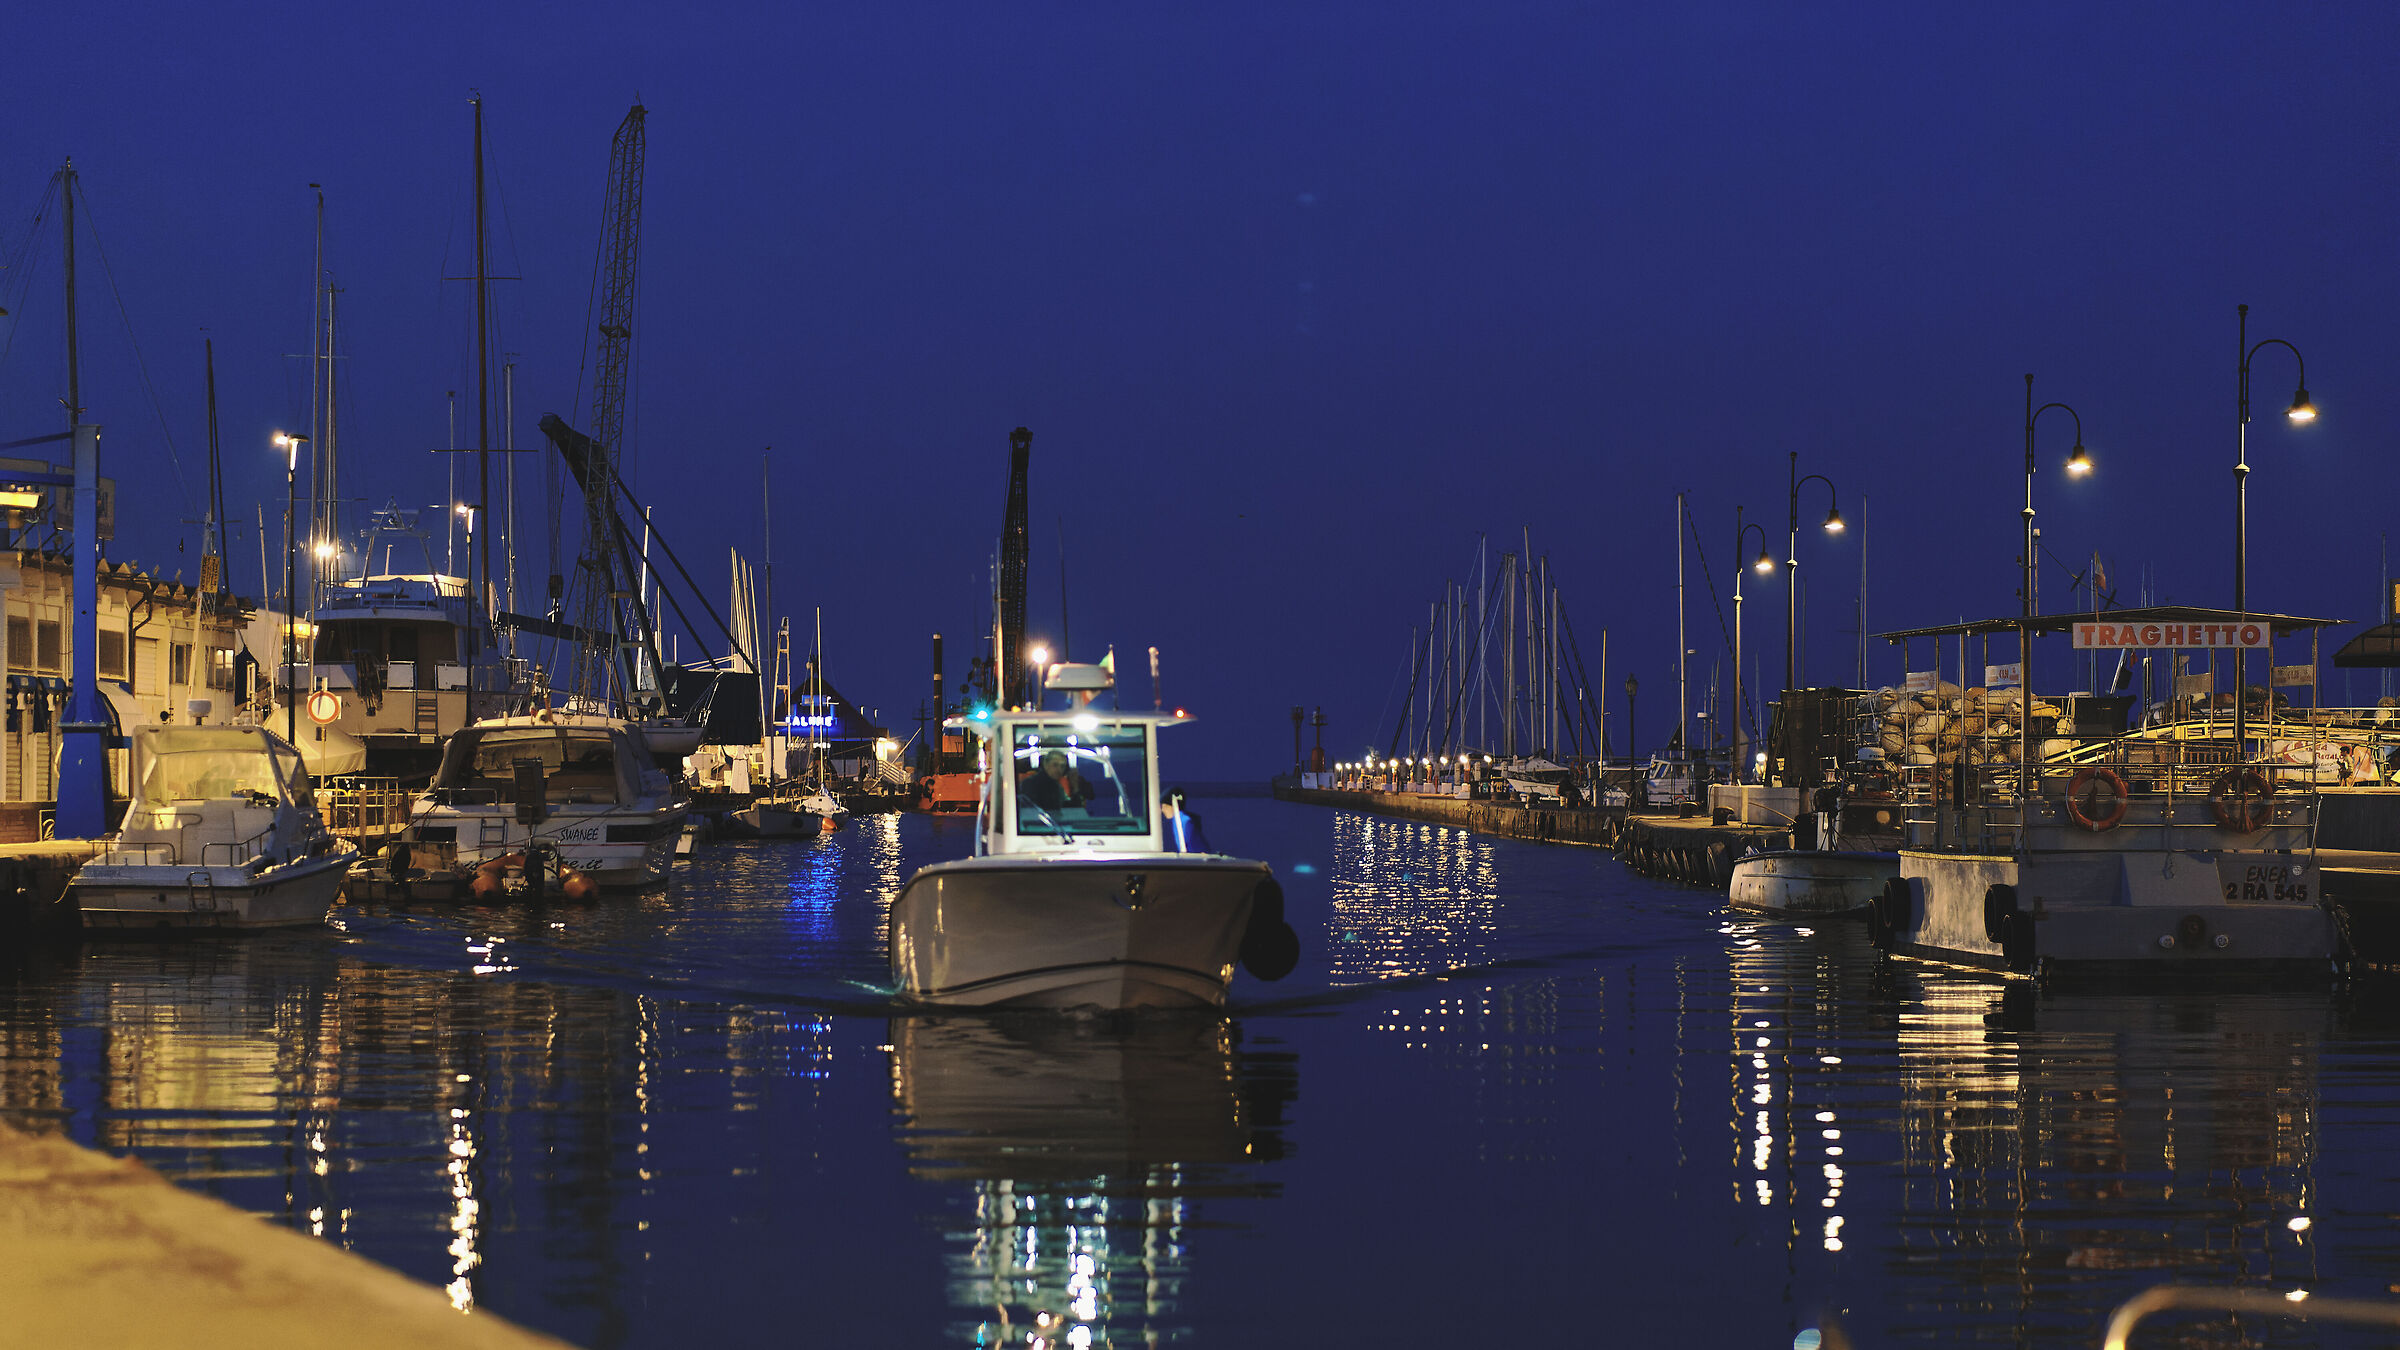 The port of Cervia - return of the boats...